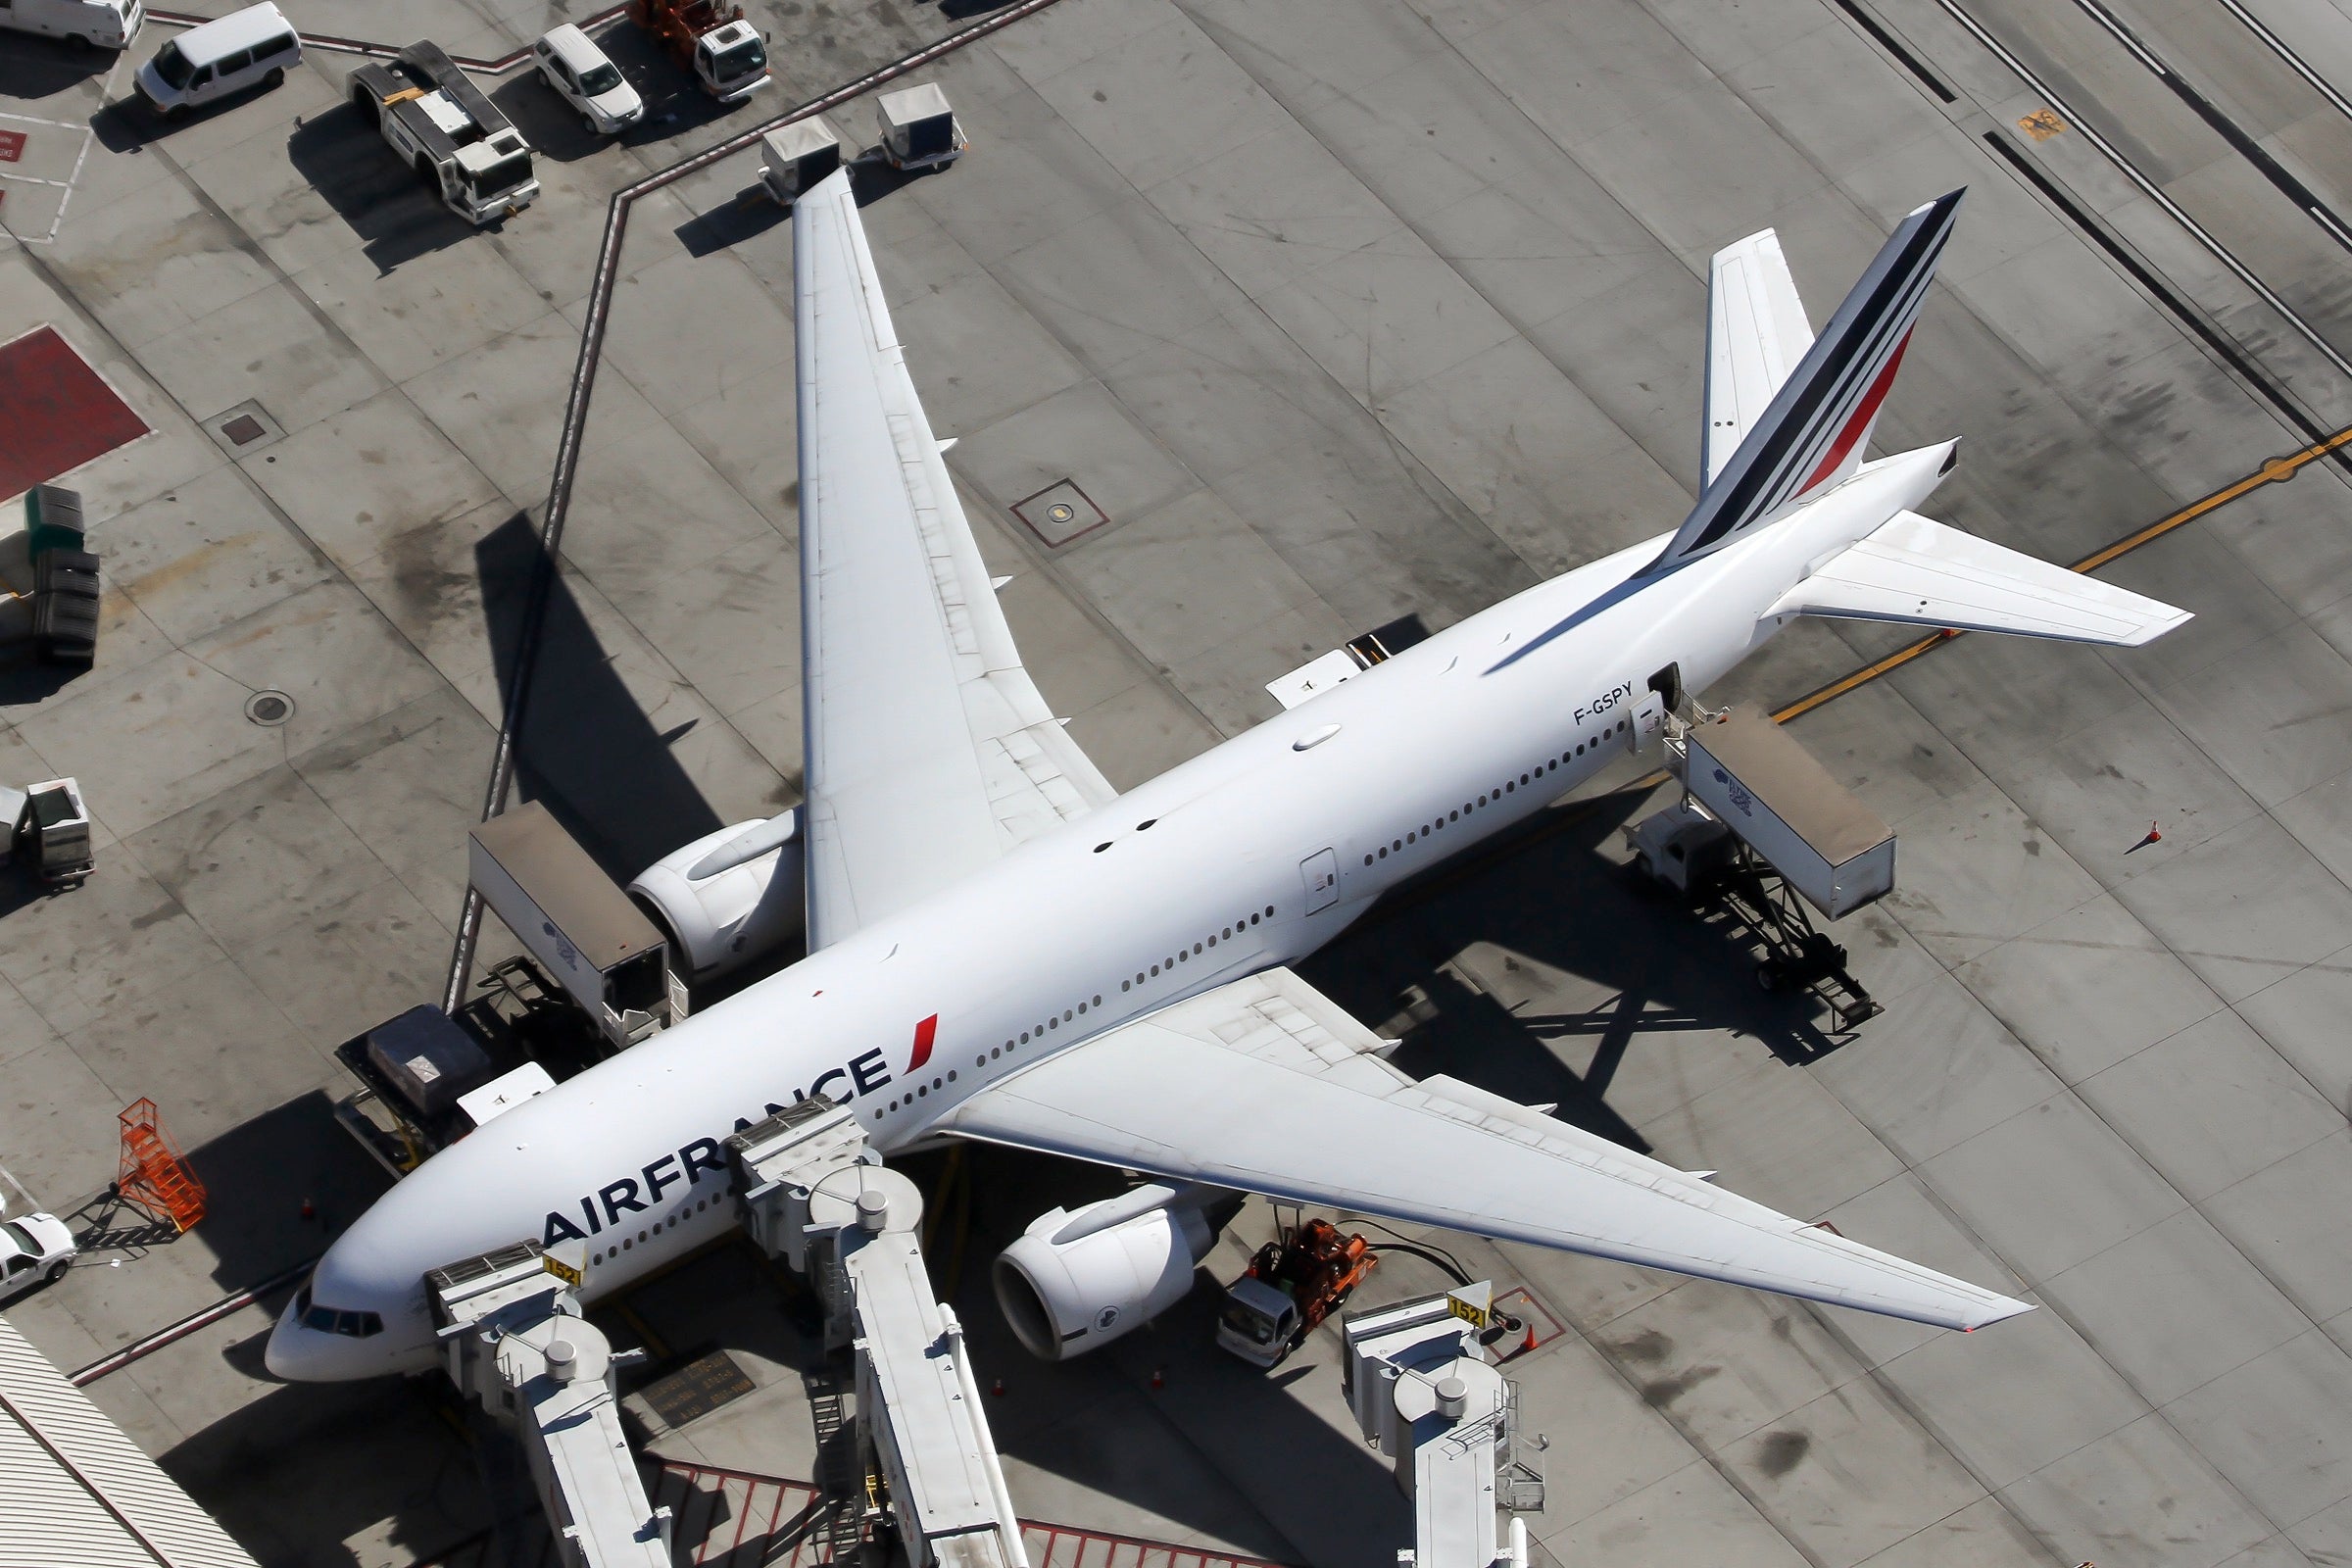 Air France 777-200ER parked at the gate in Los Angeles